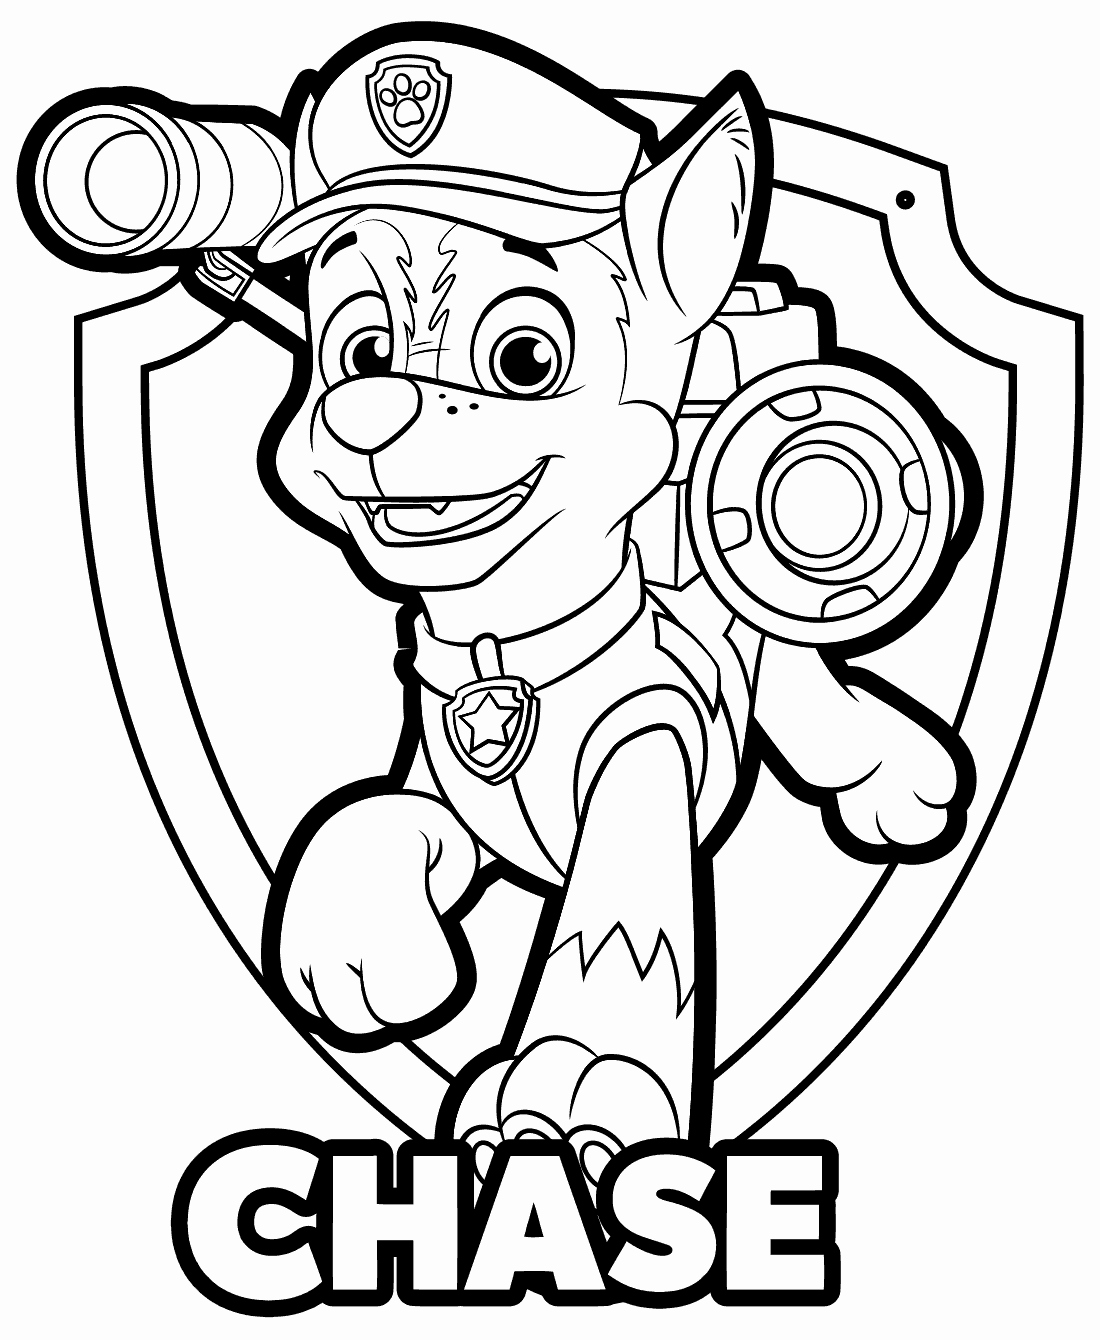 Chase Paw Patrol Coloring Page at GetDrawings  Free download